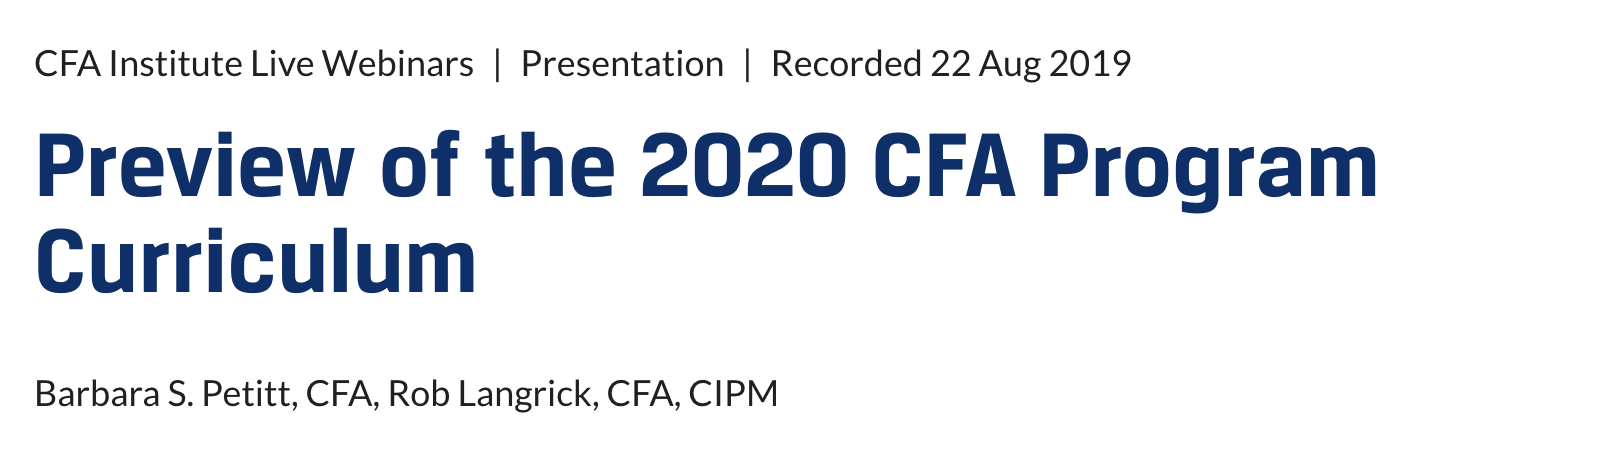 Preview of the 2020 CFA Program Curriculum